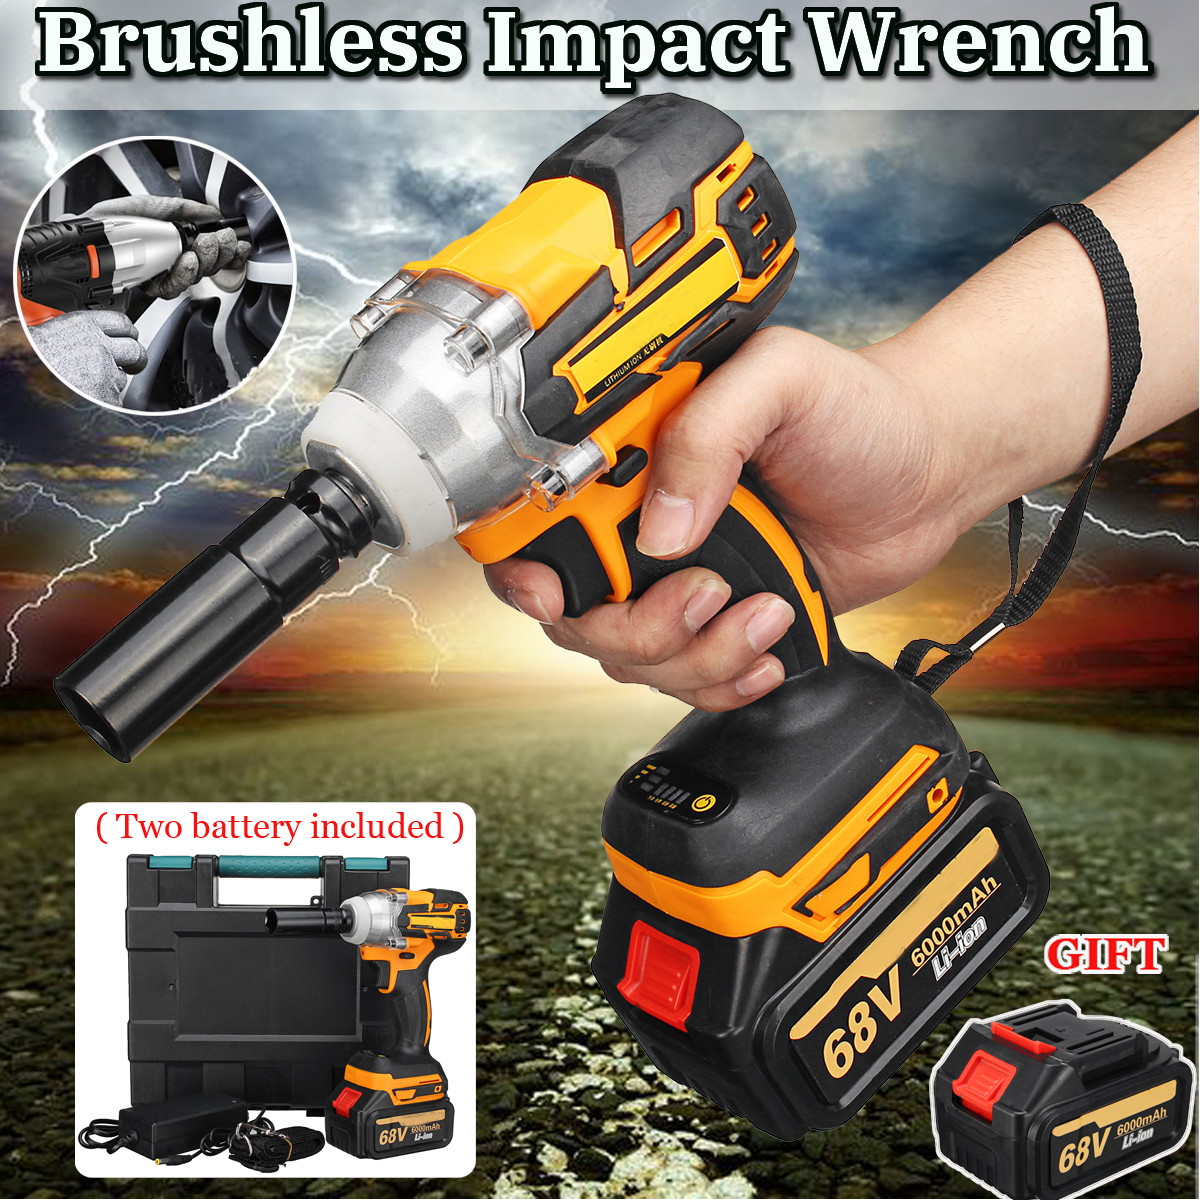 Drillpro-Electric-Wrench-Lithium-Ion-Brushless-Motor-Cordless-Impact-Wrench-2-Battries-1376318-1